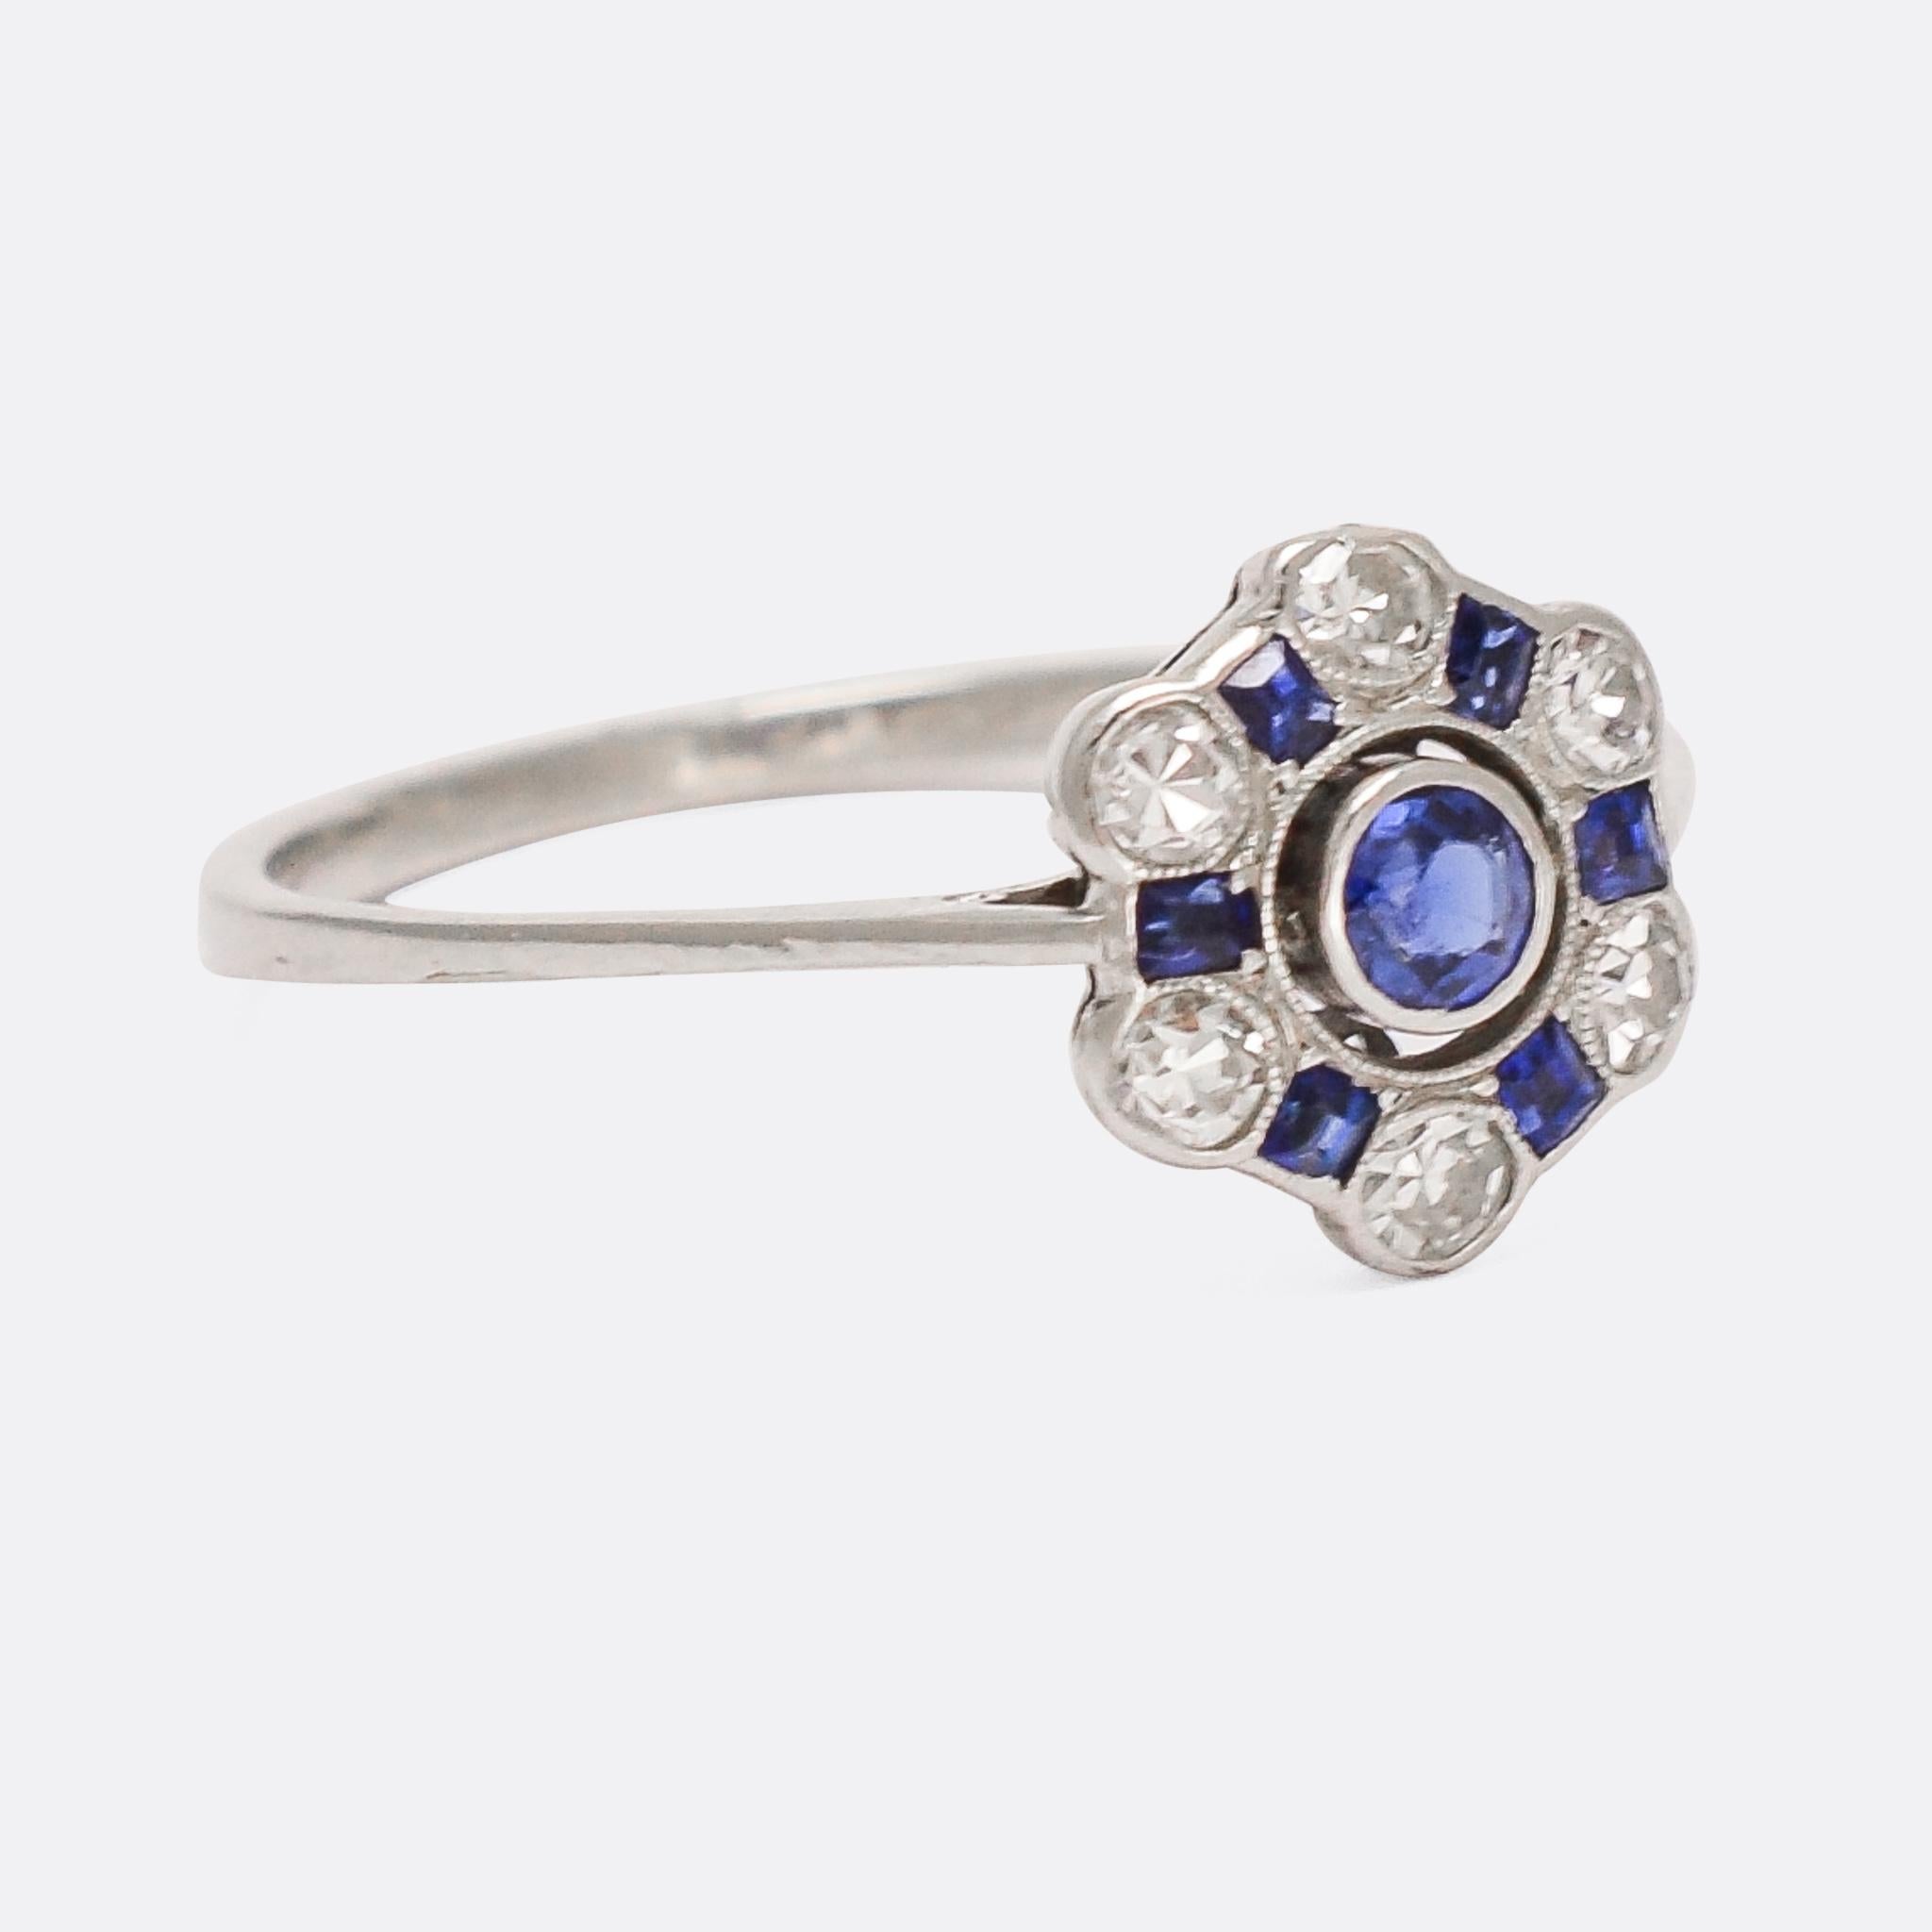 Incredibly pretty Art Deco sapphire and diamond cluster ring dating from the 1920s. It features six white diamonds, alternating with calibré cut sapphires to create a hexagonal halo around the central blue sapphire - all set in millegrain platinum